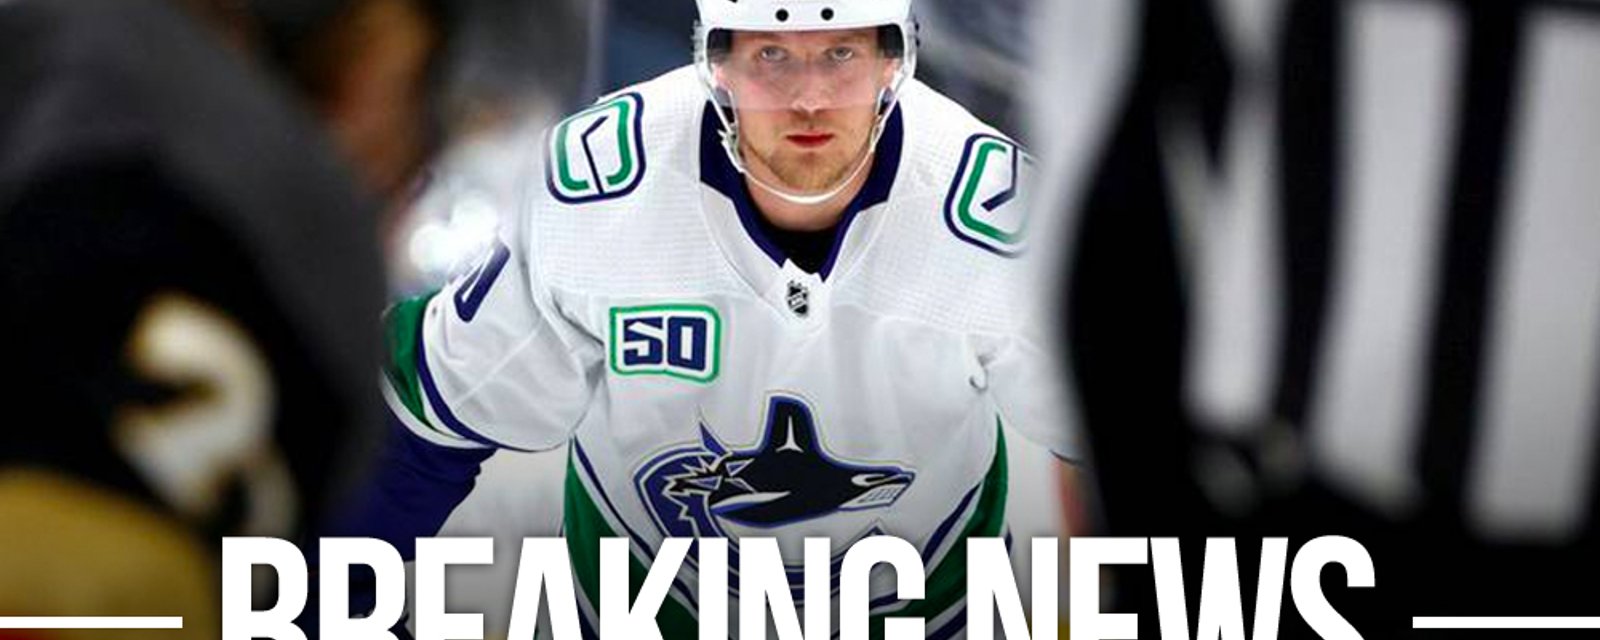 NHL Player Safety punishes three players including Canucks star Elias Pettersson